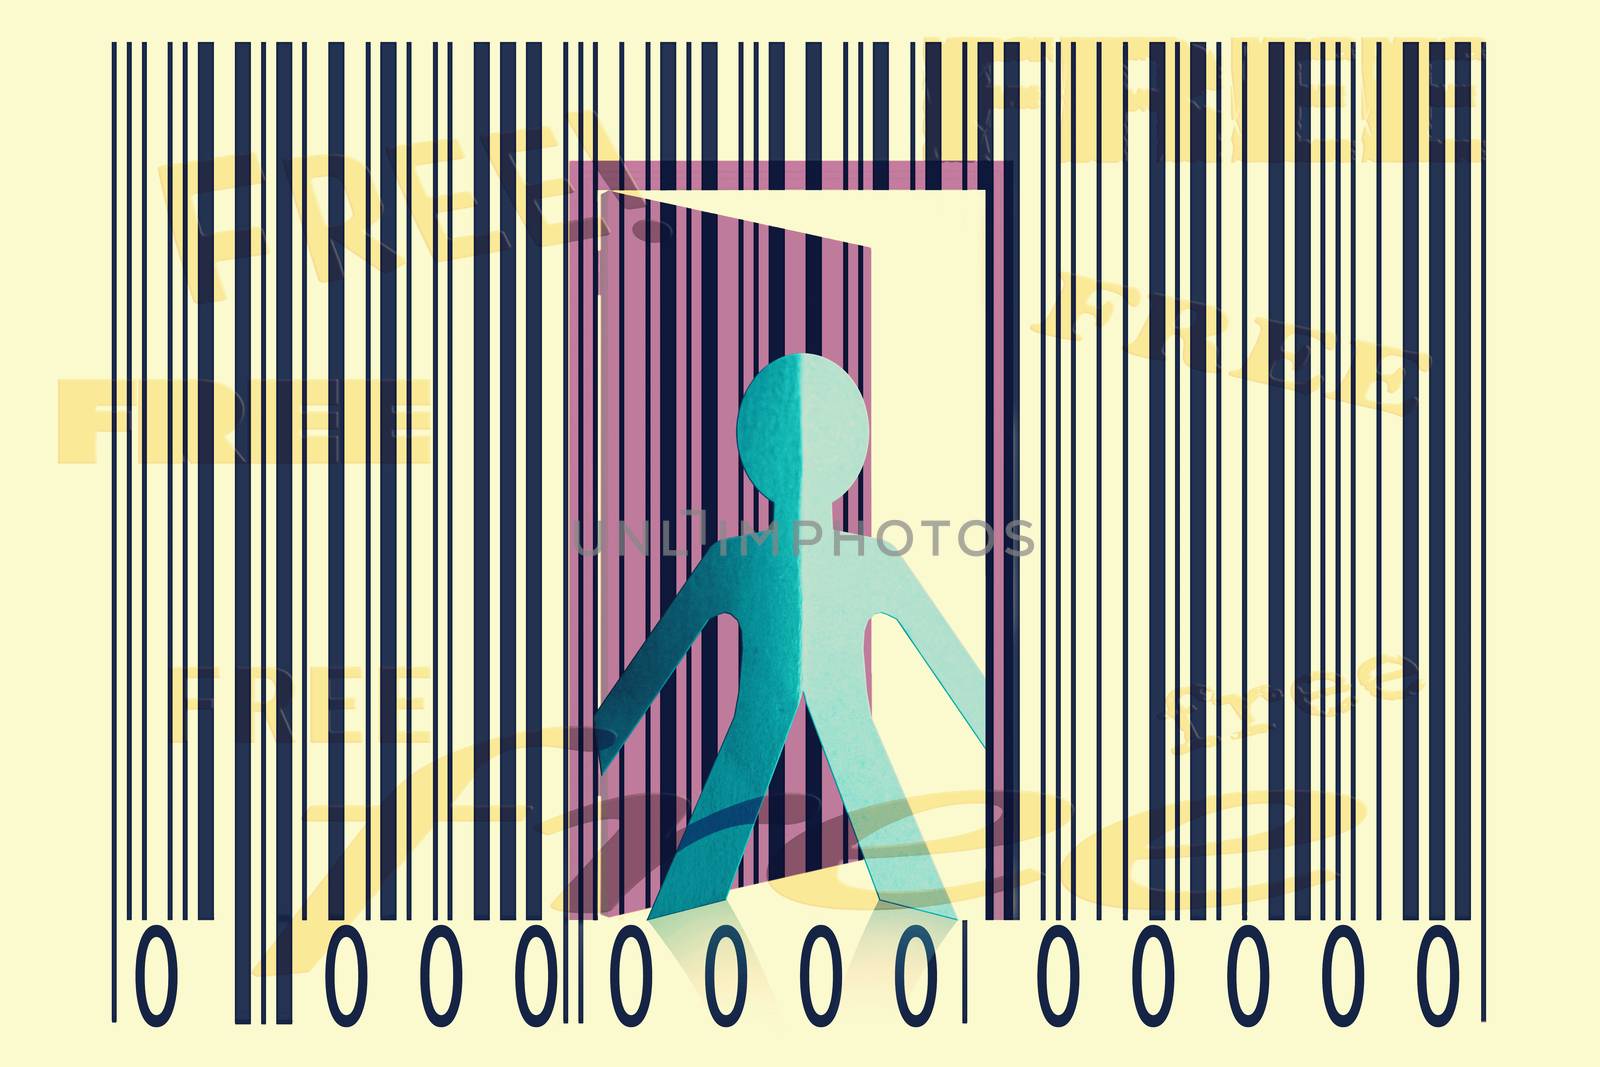 Paperman coming out of a bar code with Free Word